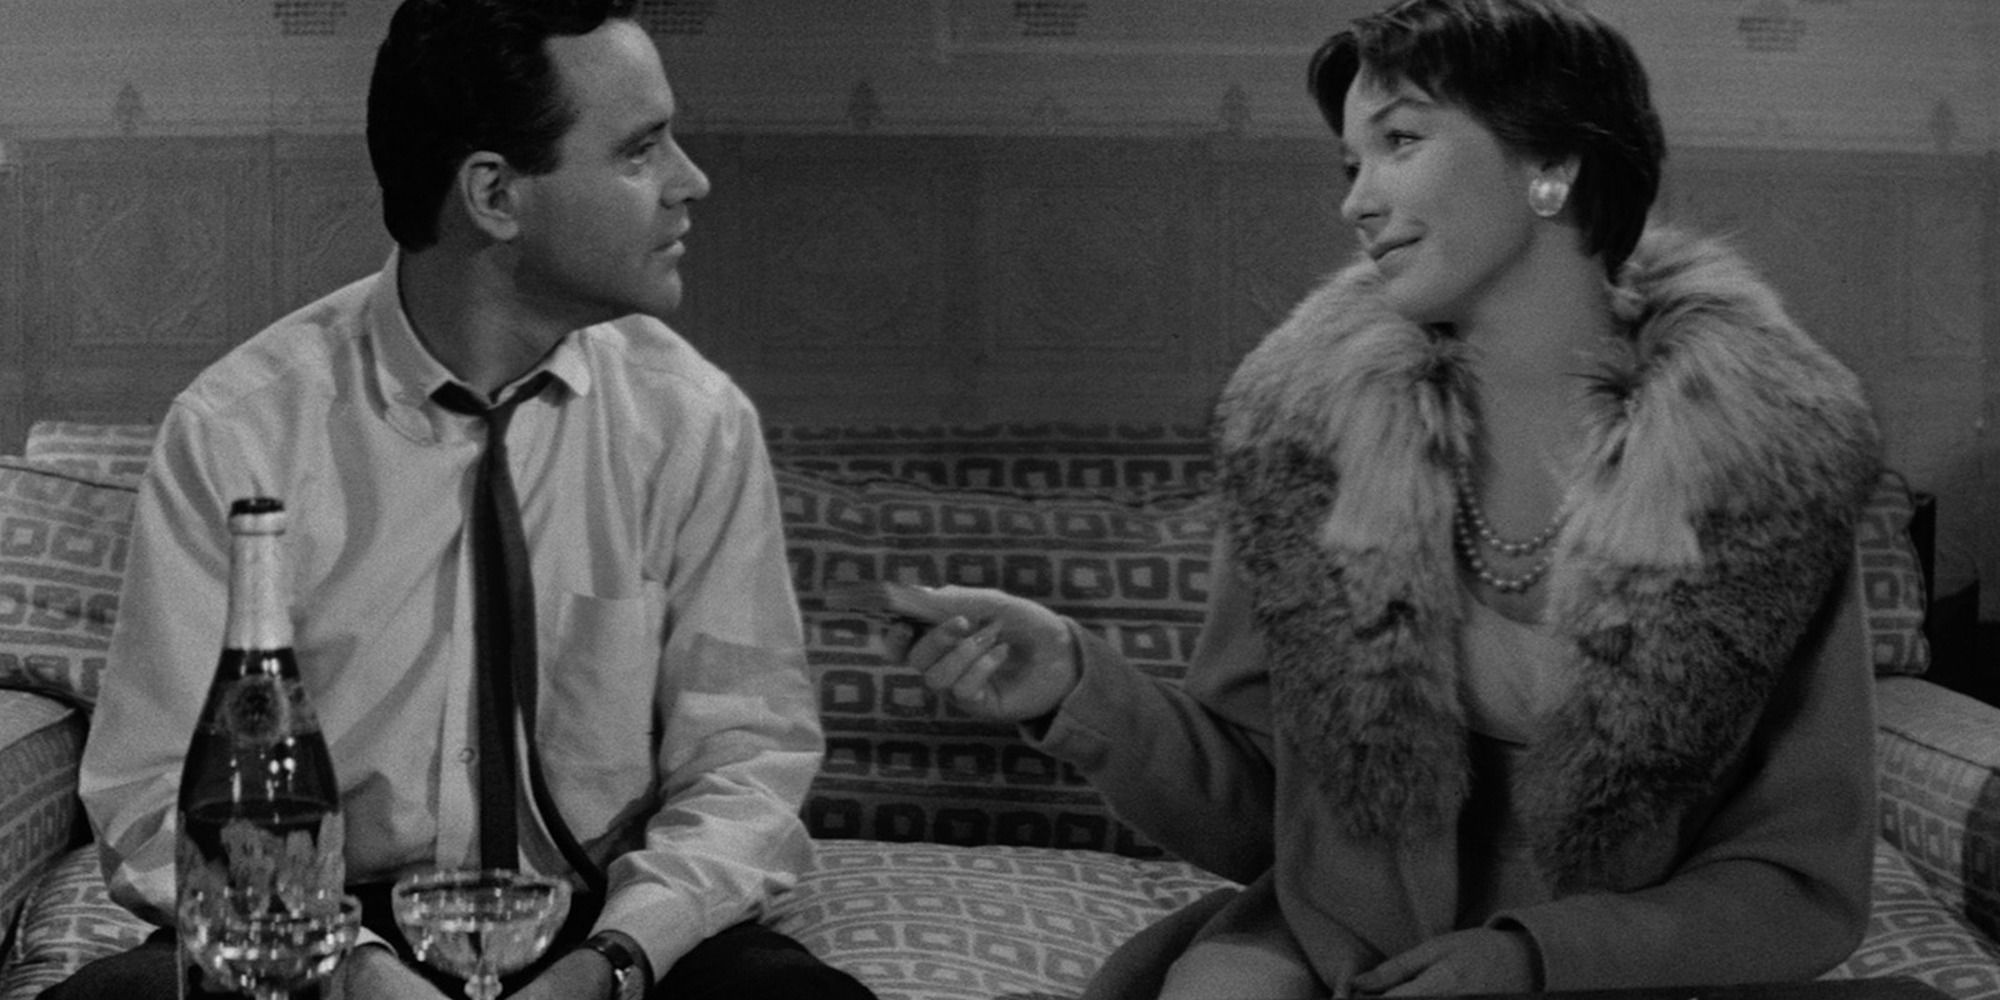 Jack Lemmon and Shirley MacLaine in The Apartment, sitting together in a couch playing cards